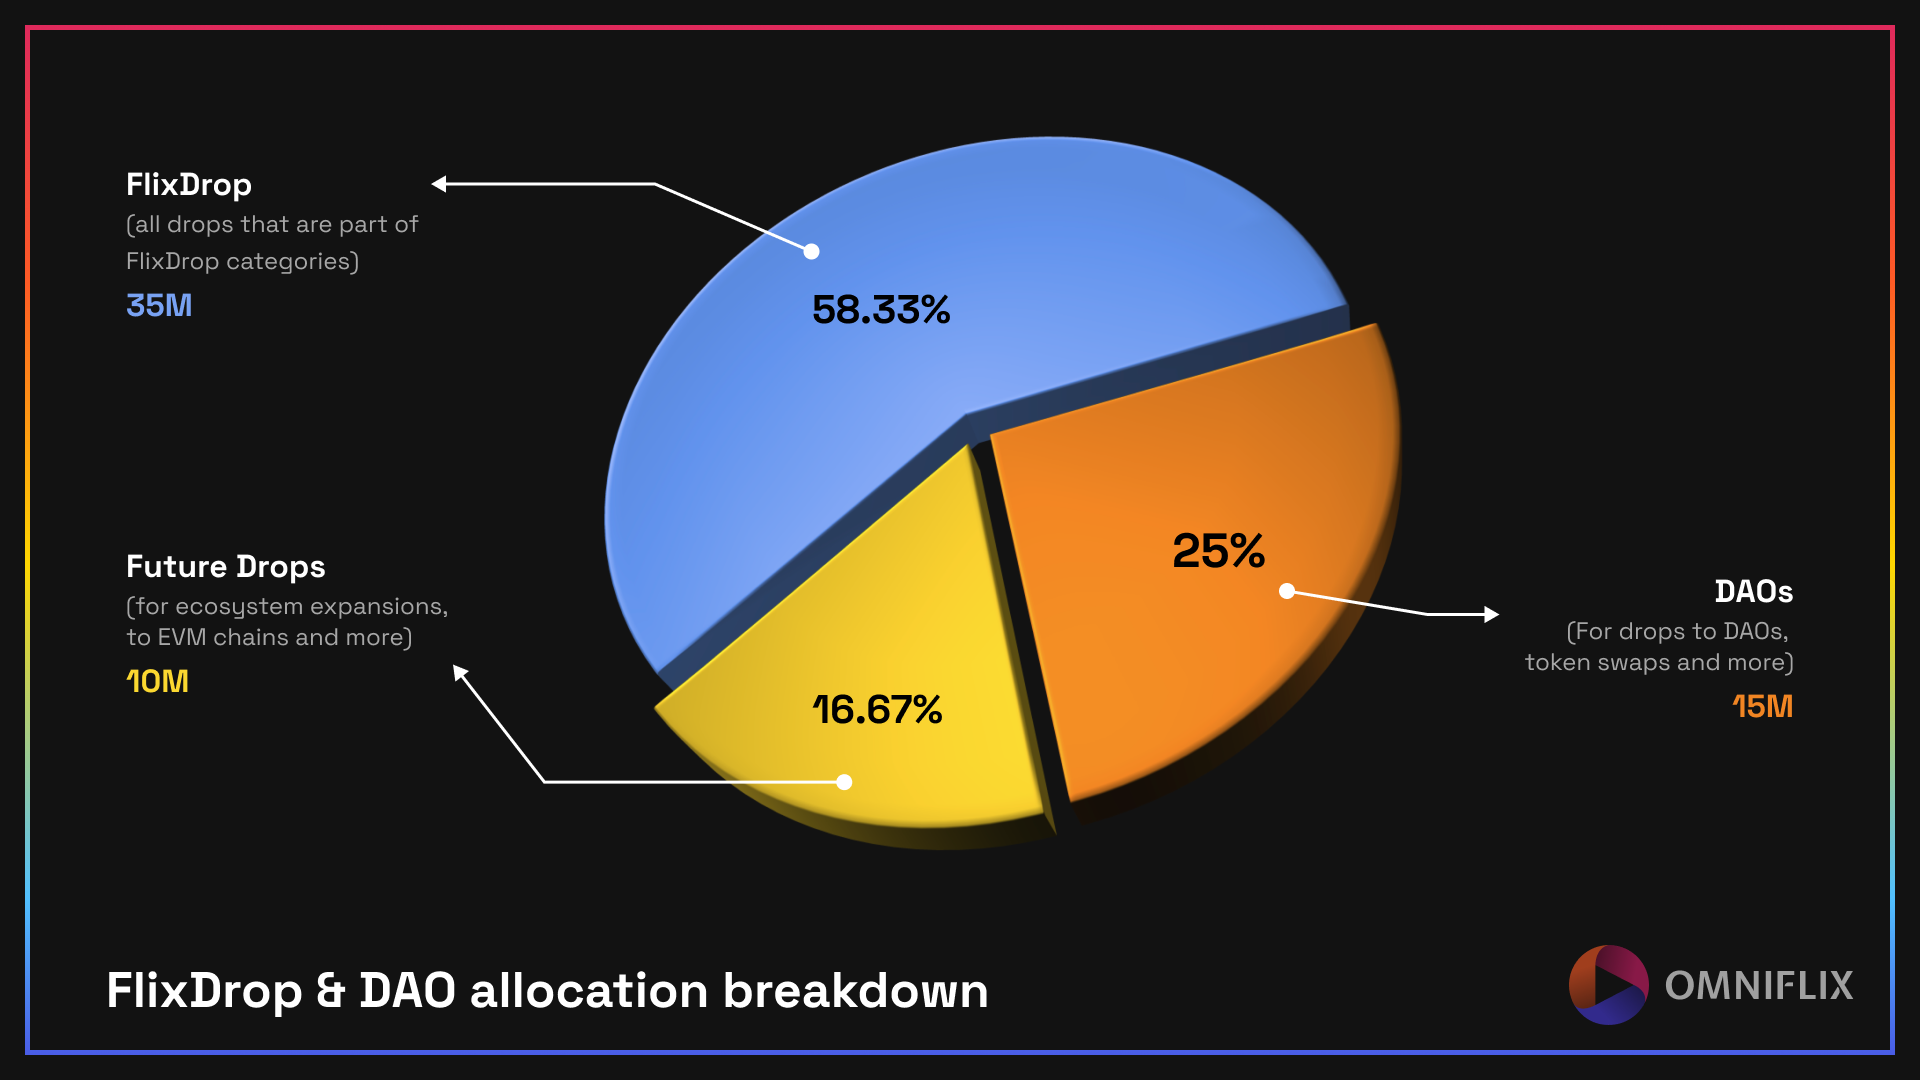 Breakdown of total tokens allocated for the FlixDrop & DAO allocation